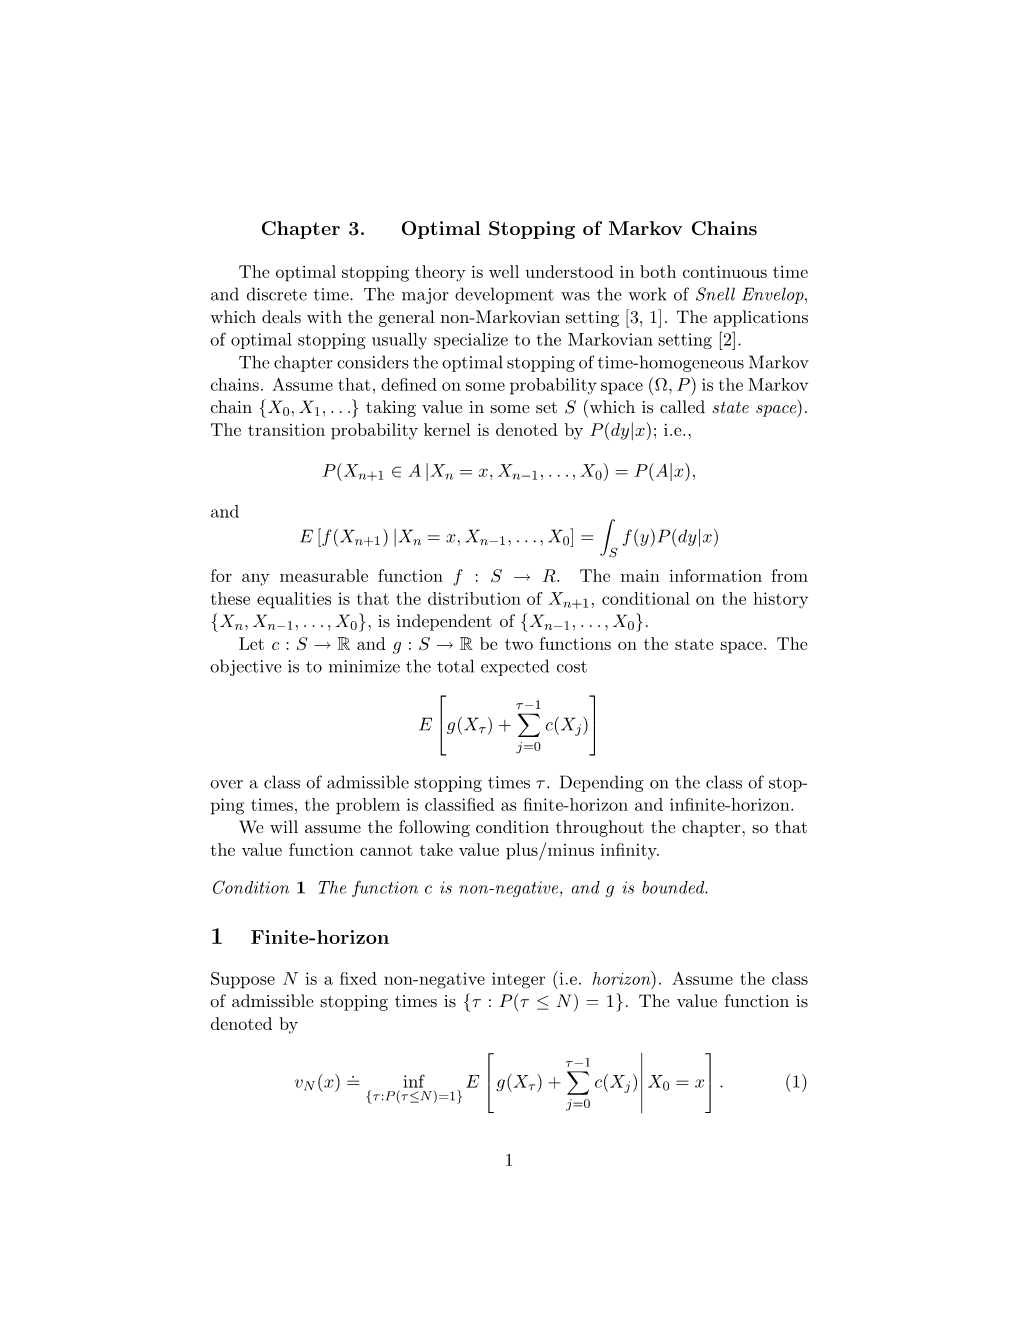 Chapter 3. Optimal Stopping of Markov Chains 1 Finite-Horizon